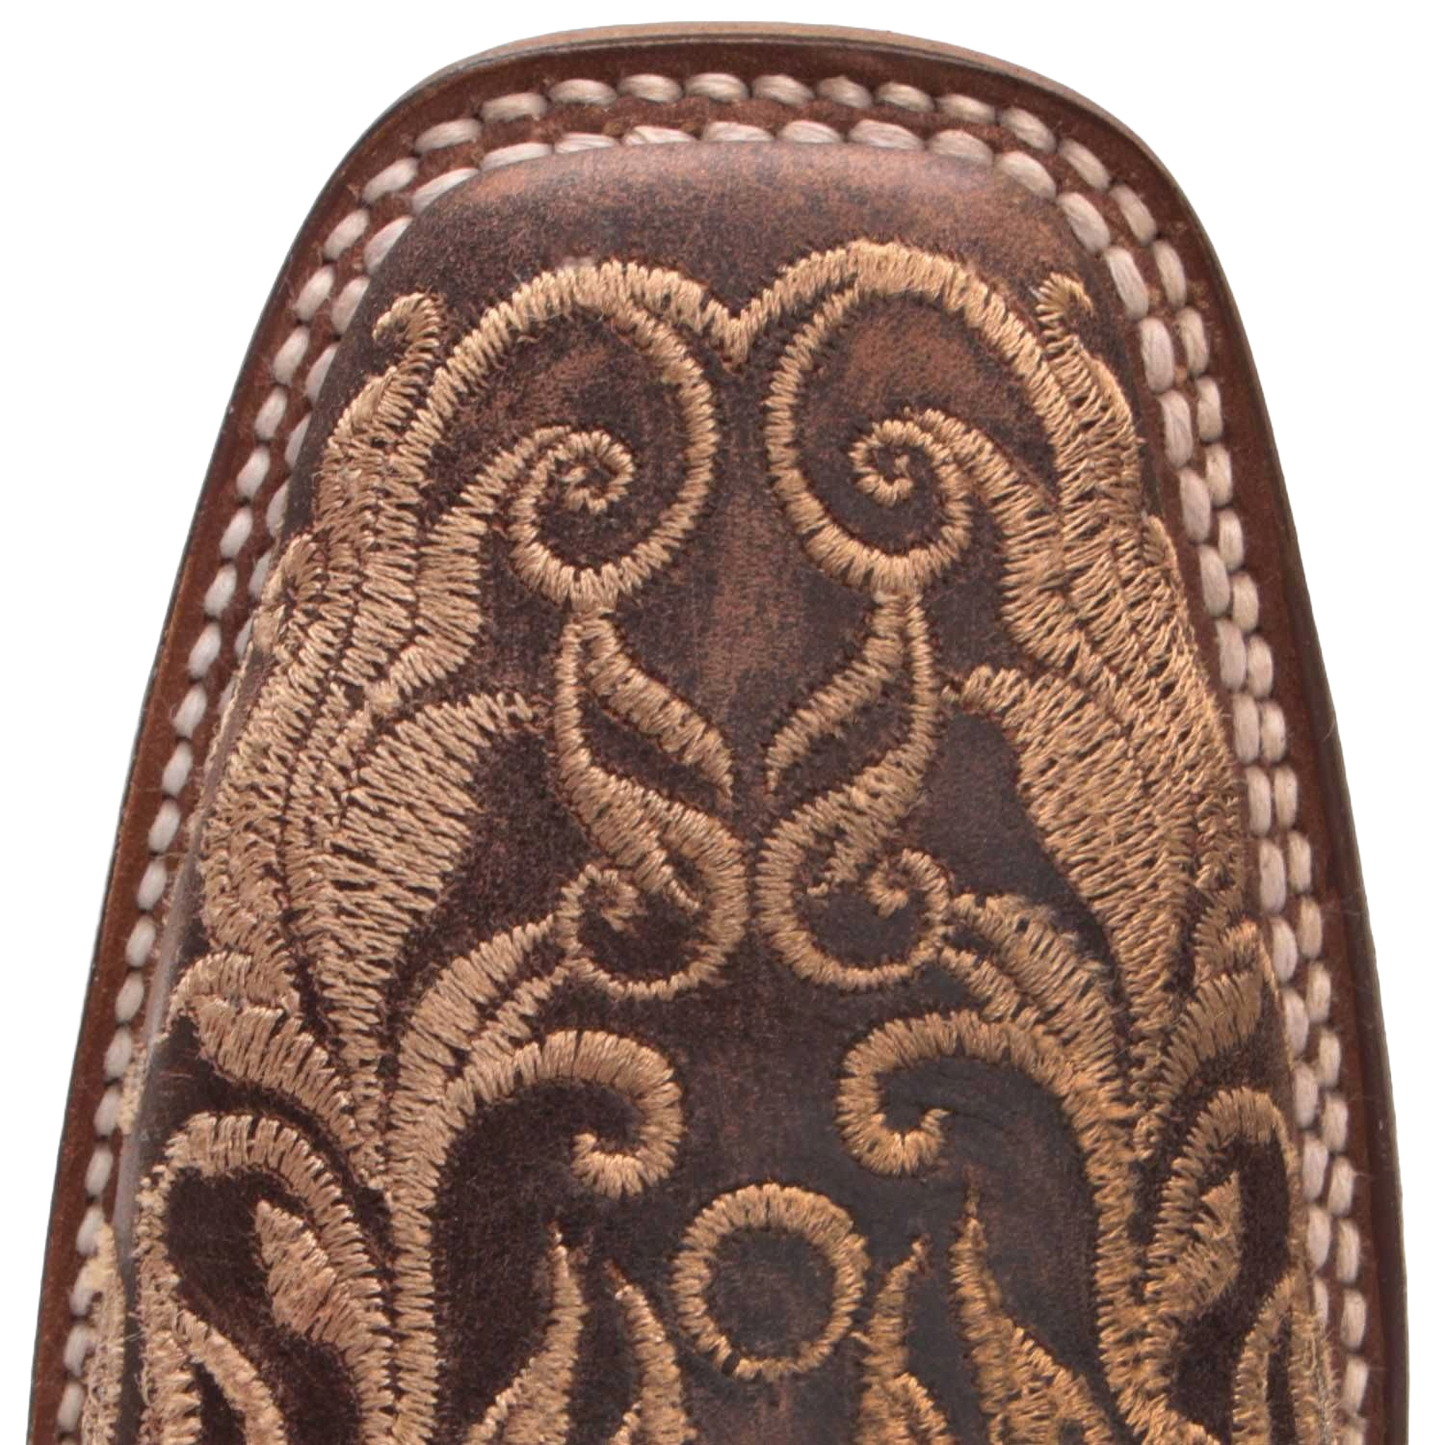 Corral Ladies Honey Brown Embroidered Square Toe Western Boots Z5022